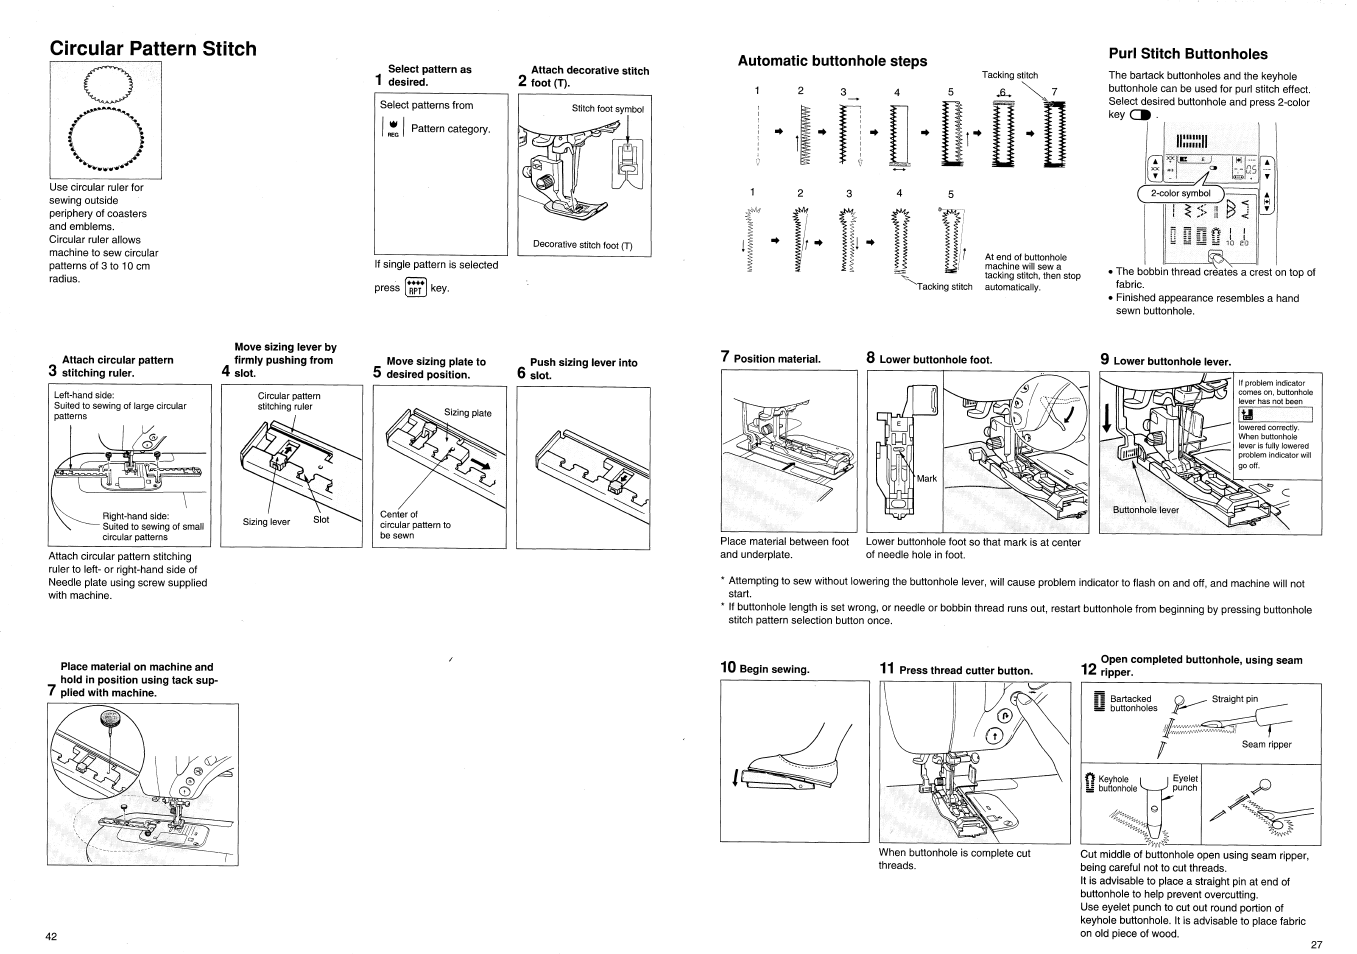 Automatic buttonhole steps, Purl stitch buttonholes, 7 position material. 8 lower buttonhole foot | Open completed buttonhole, using seam 12 ripper | SINGER XL100 Quantum User Manual | Page 29 / 72